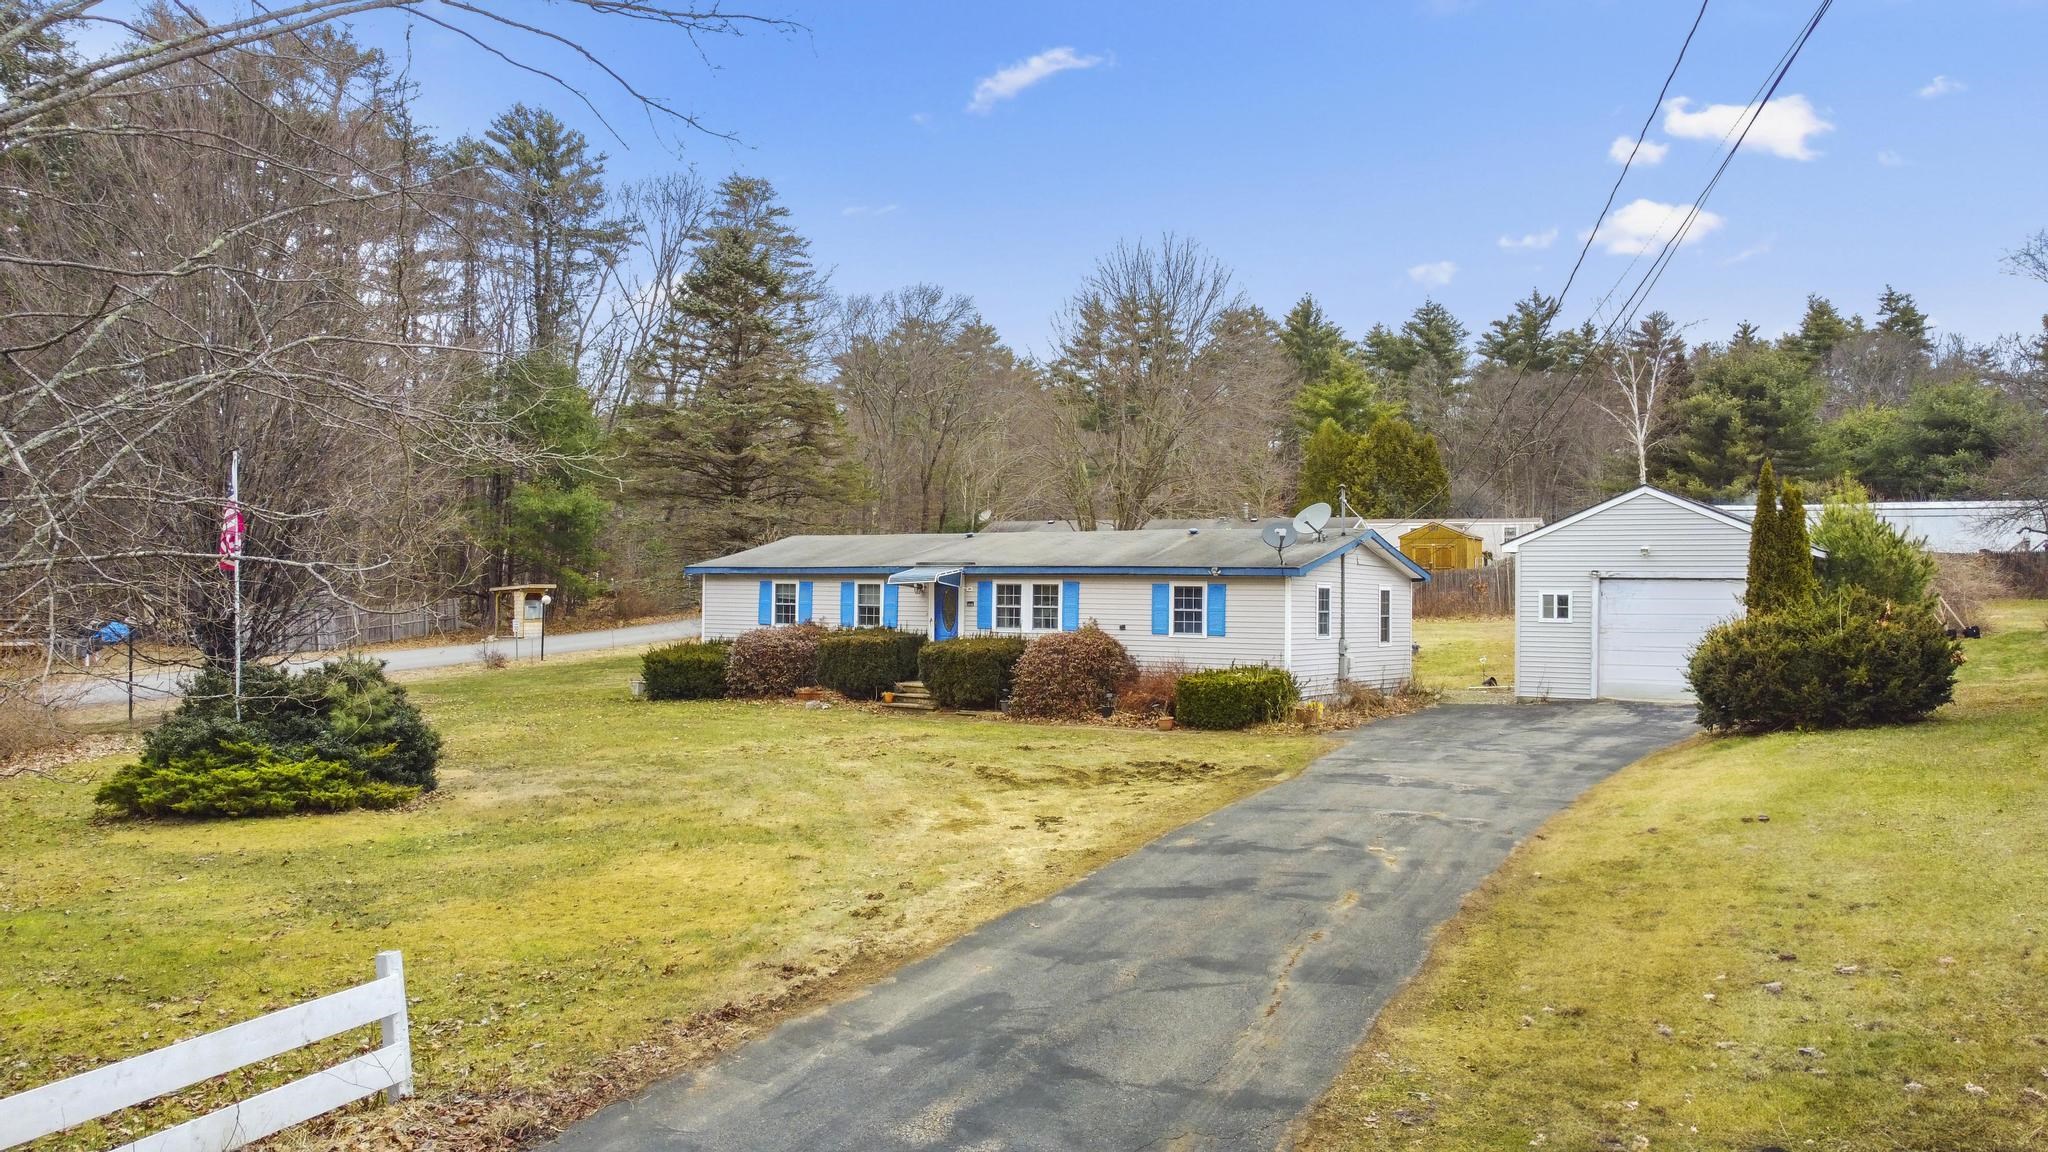 50 Whitehouse Road, Rochester, NH 03800